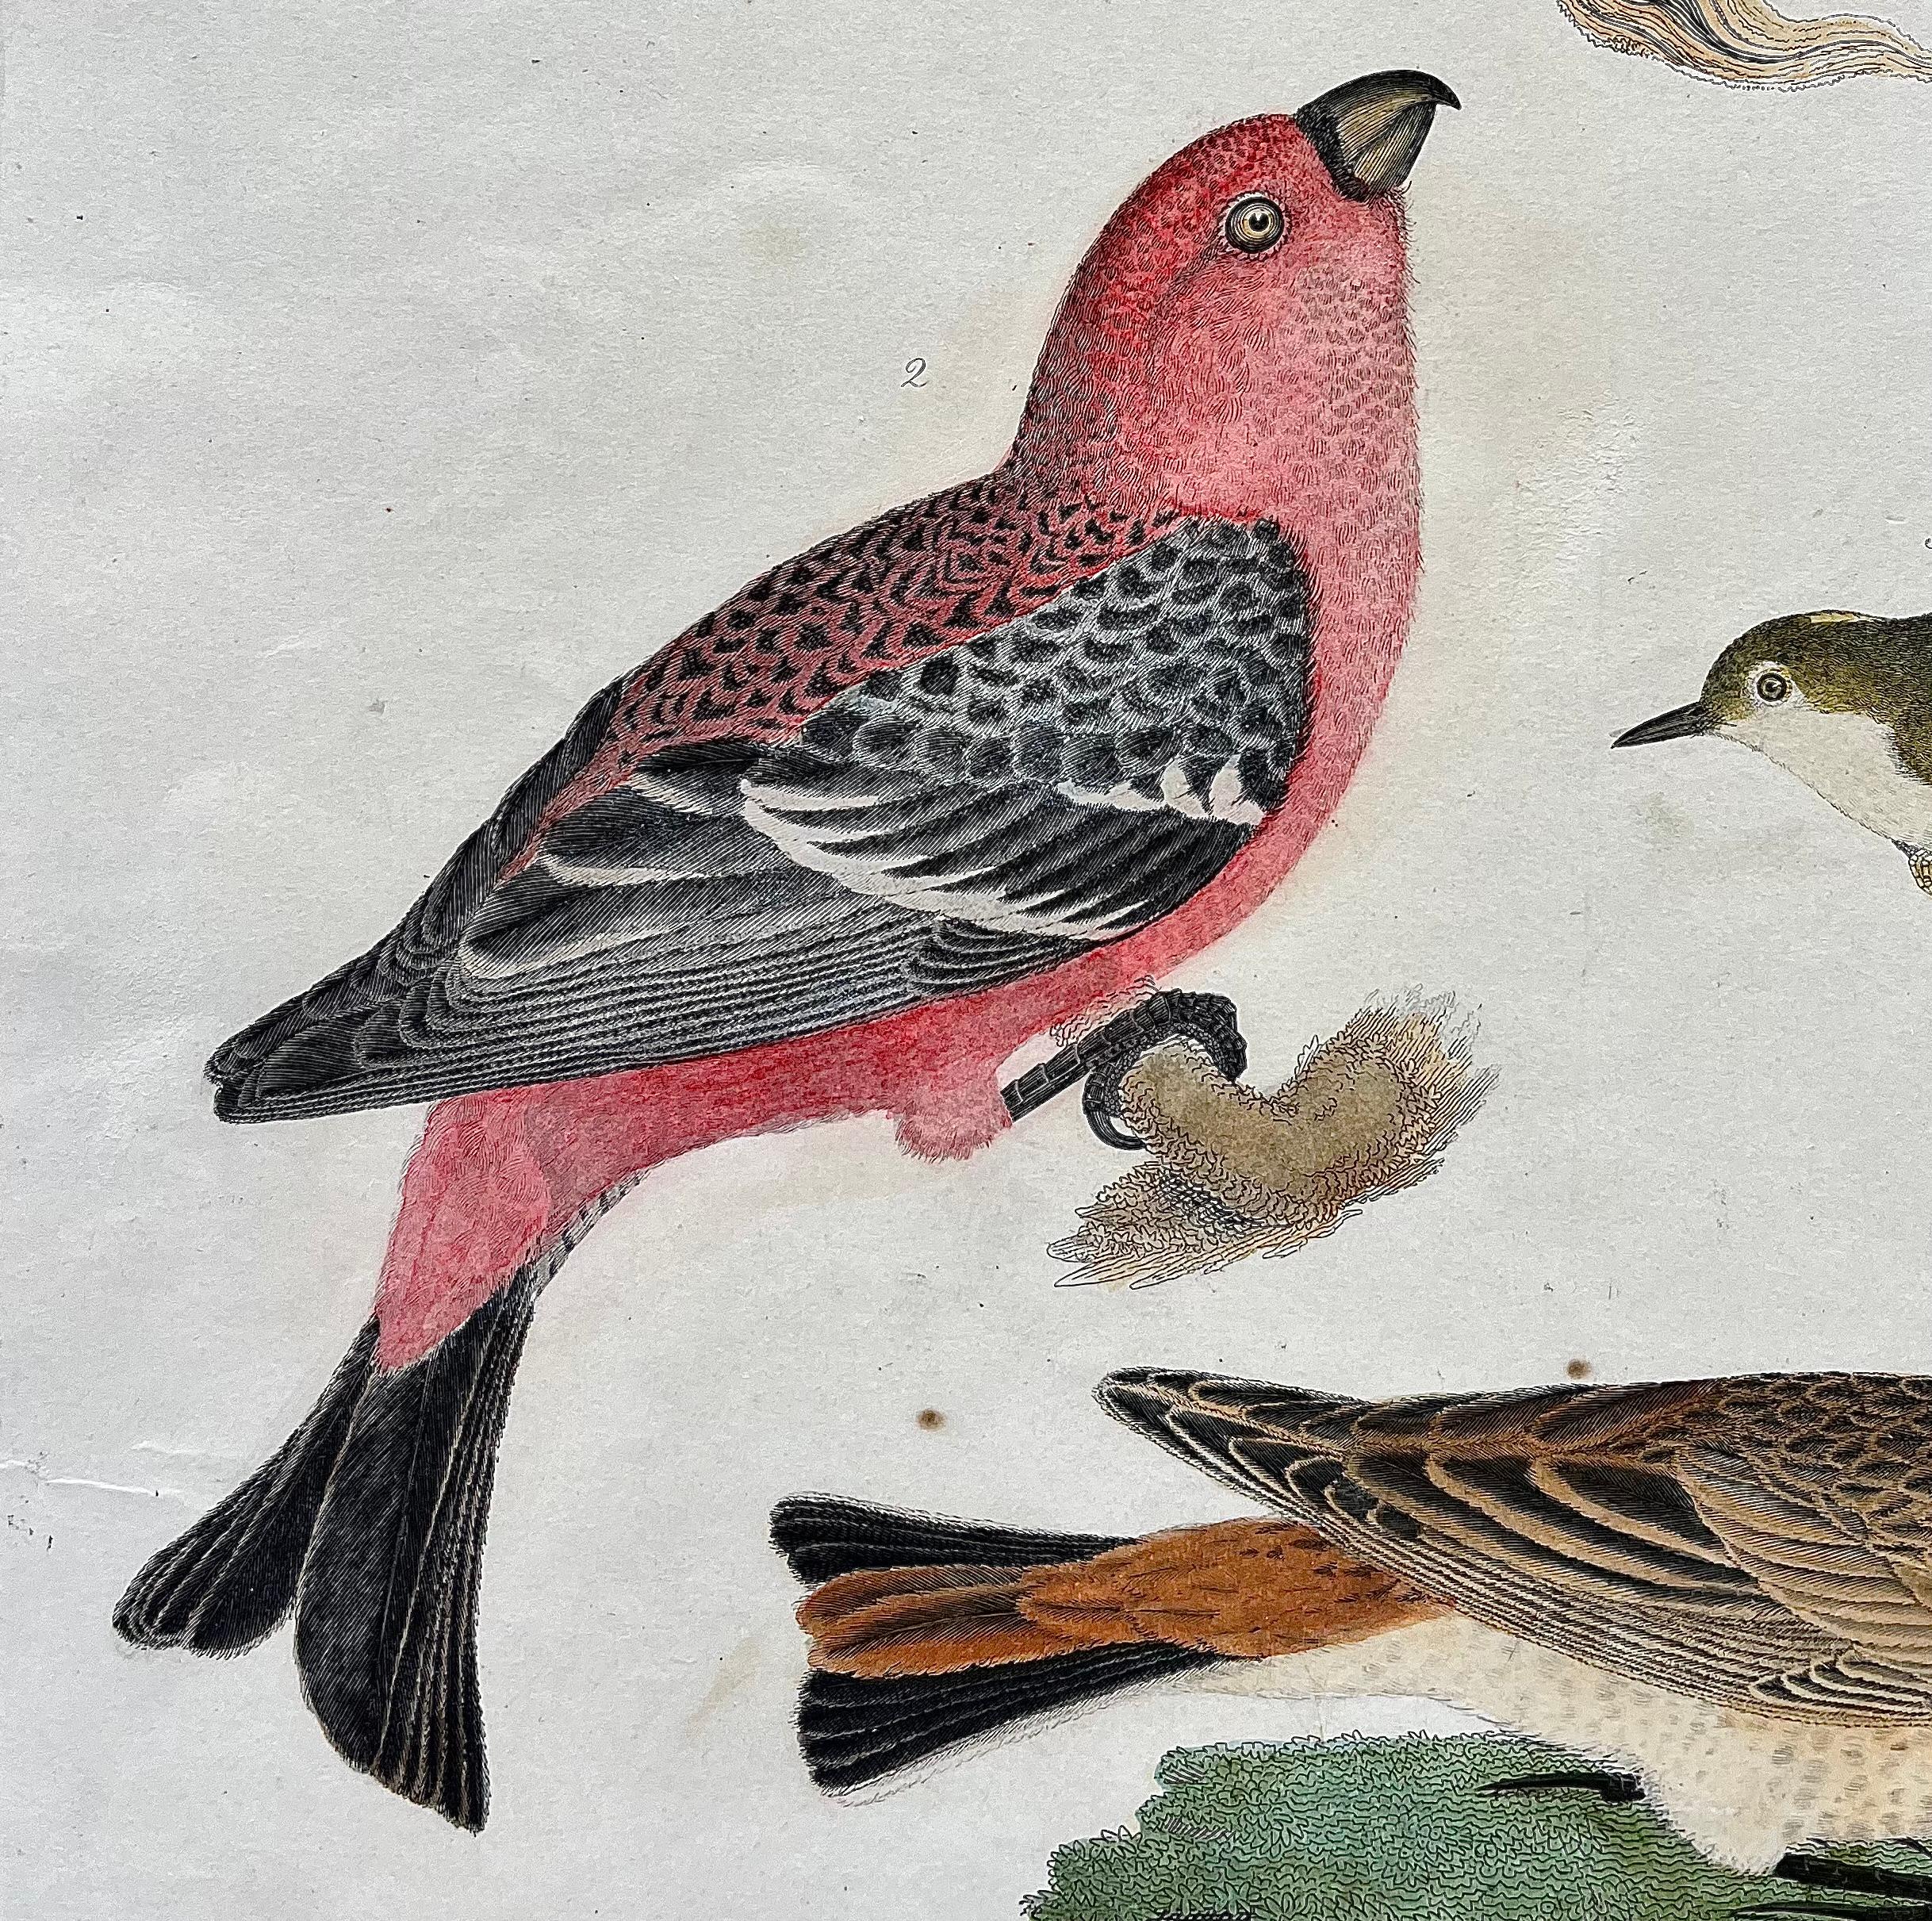 Engraved Early 19th Century Original Alexander Wilson Print of American Ornithology For Sale